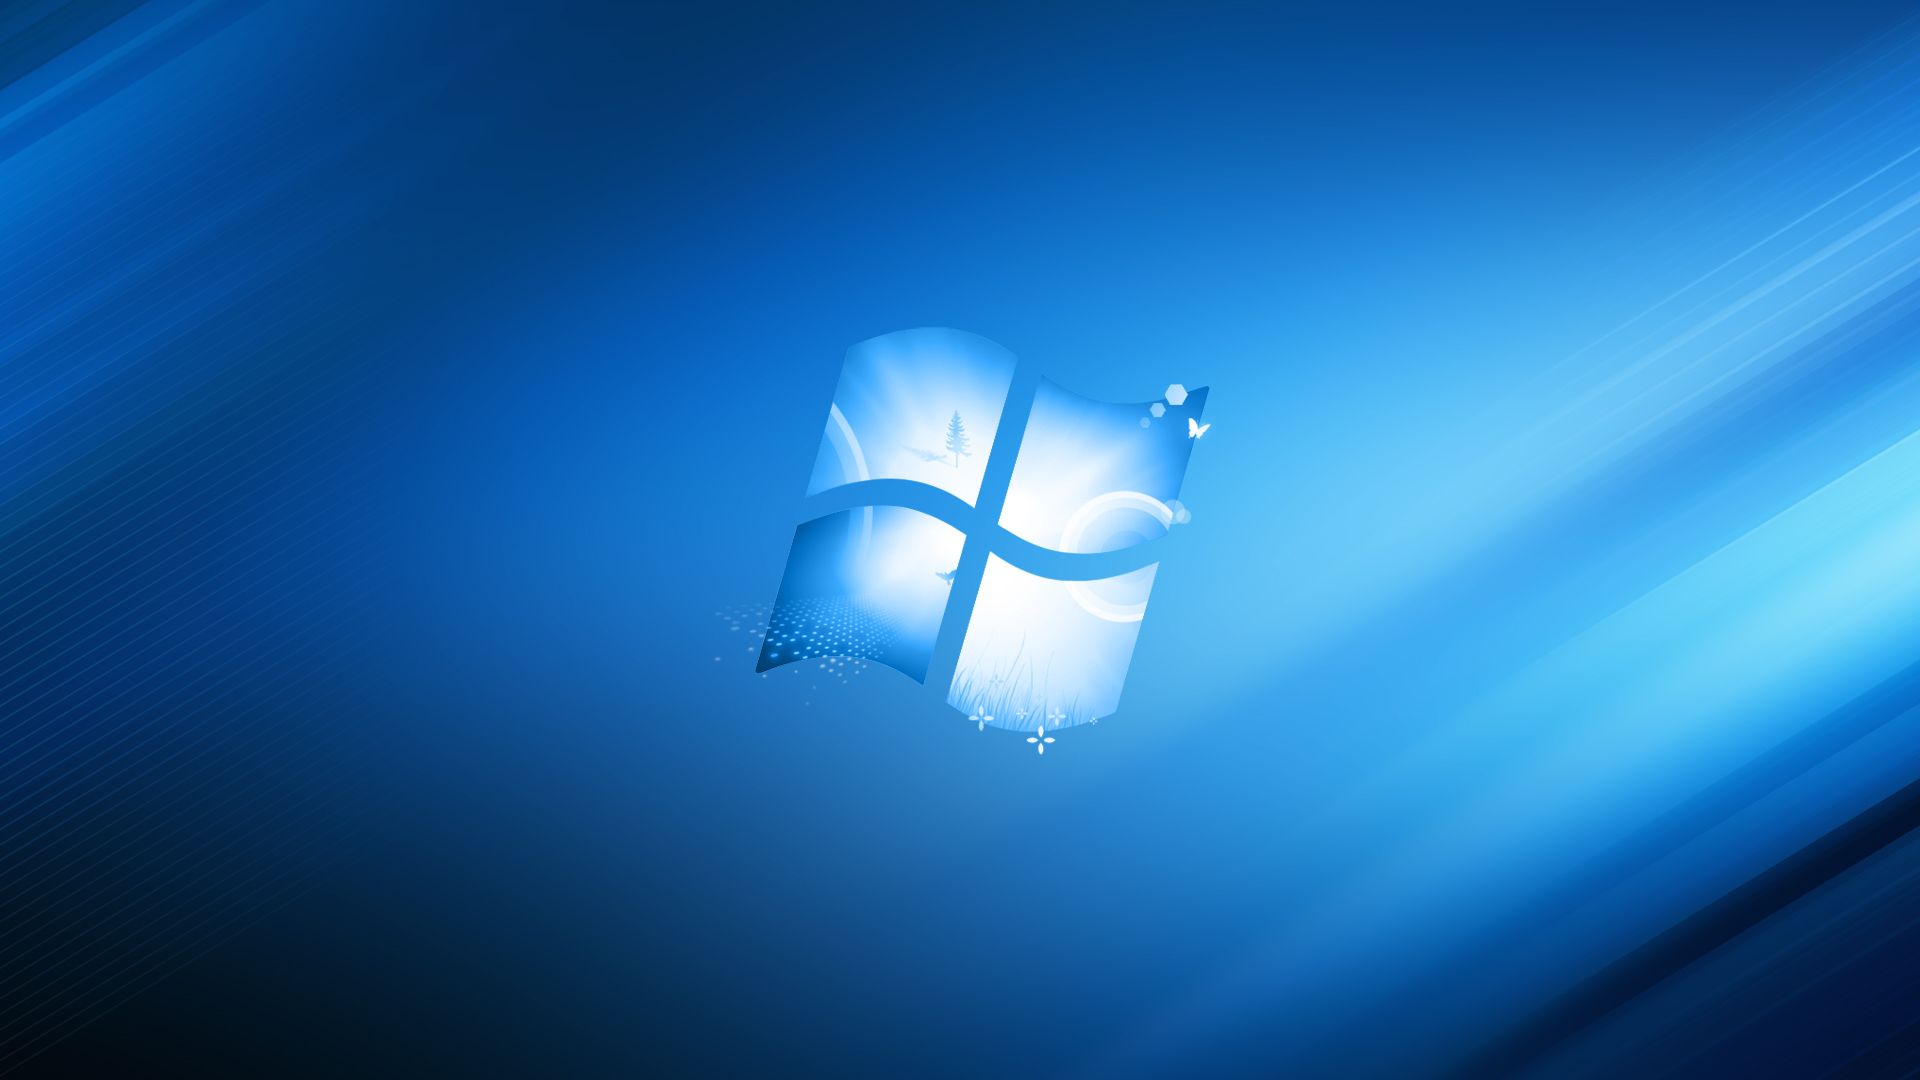 Windows 8 Wallpaper in HD For Free Download